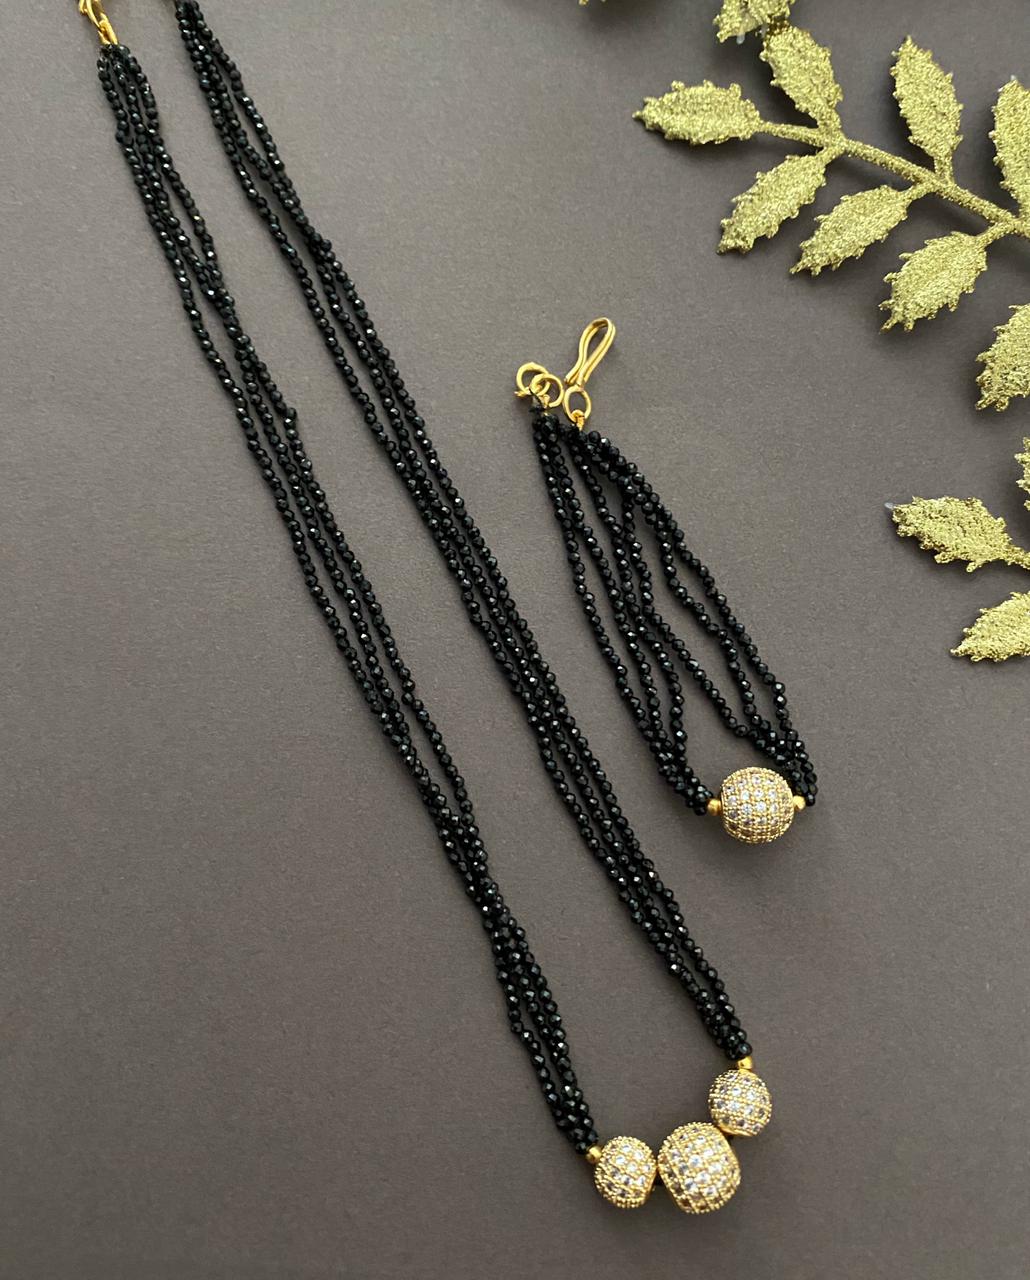 Mangalsutra Handcrafted In Black Spinal Beads With AD Balls By Gehna Shop Mangalsutras